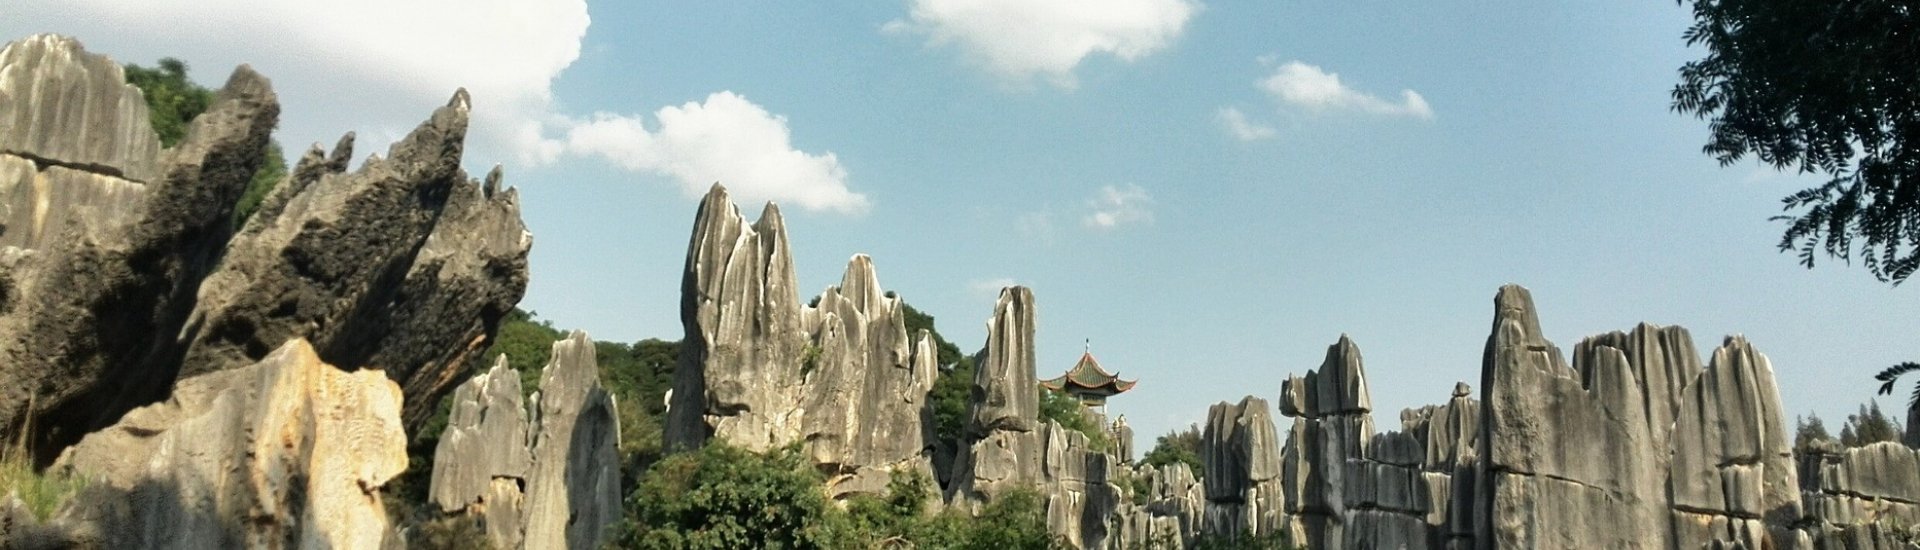 Shi Lin Stone Forest